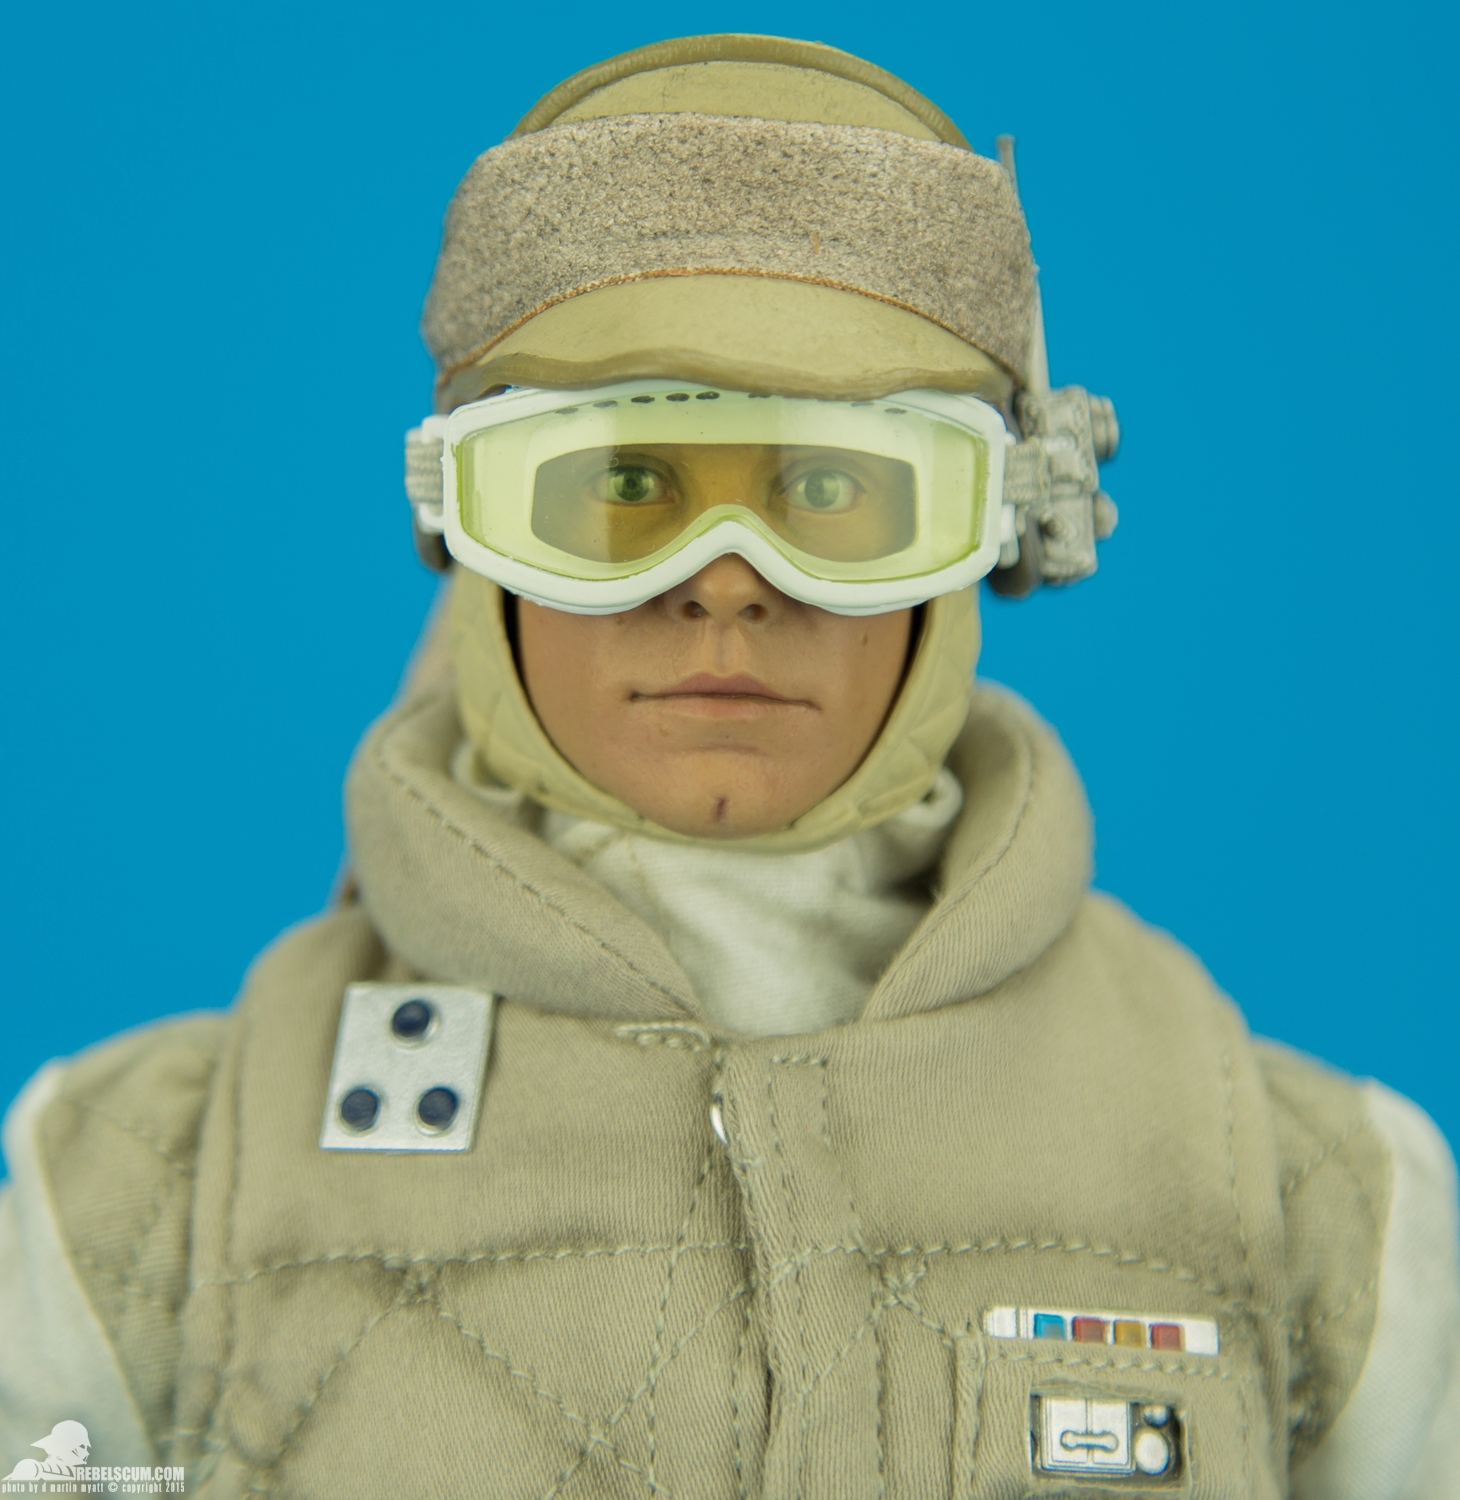 Luke-Skywalker-Hoth-Sixth-Scale-Sideshow-Collectibles-Star-Wars-025.jpg